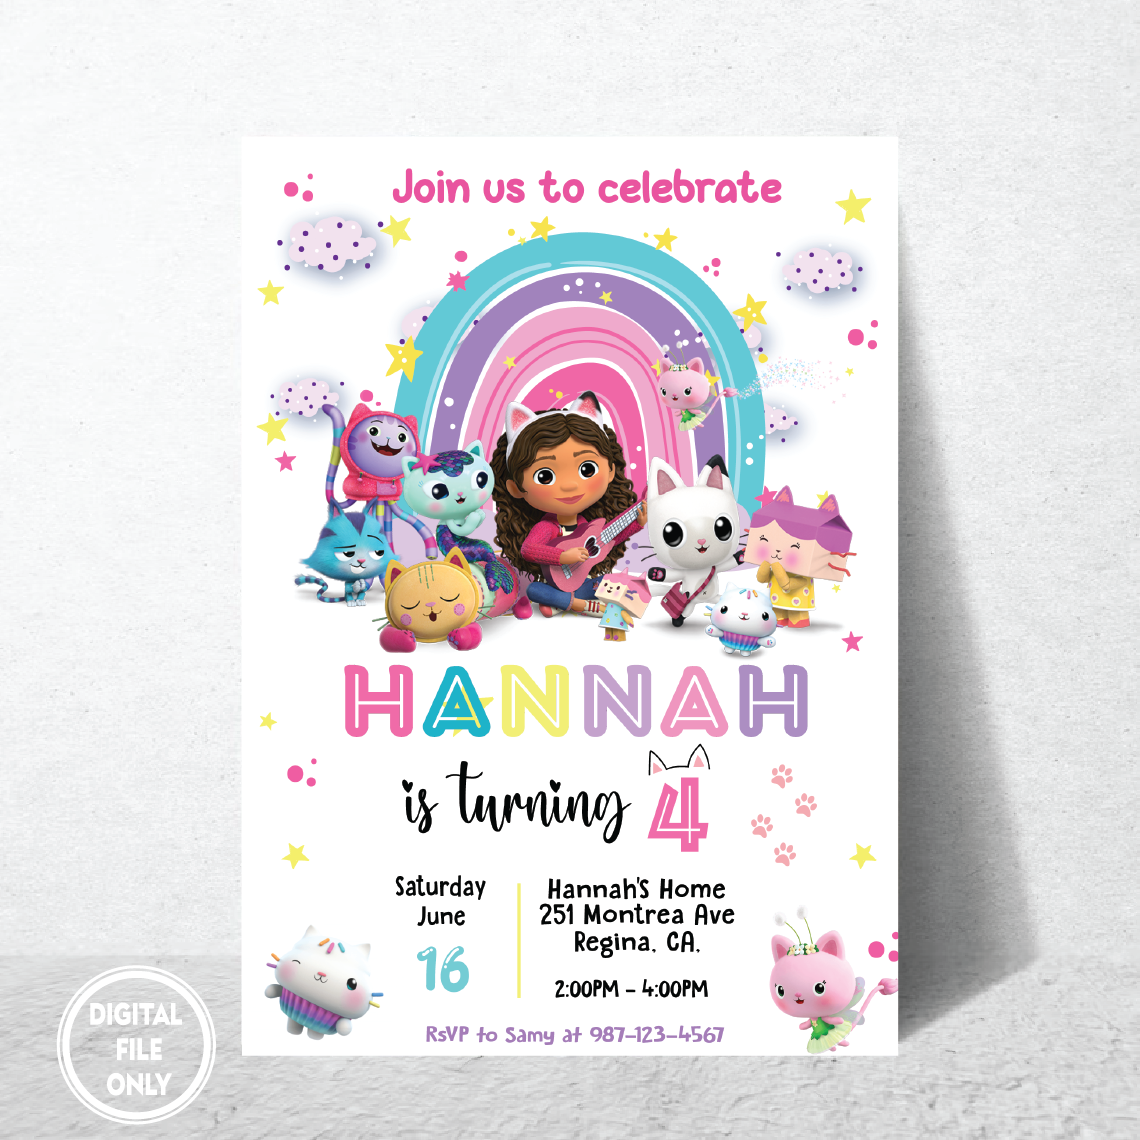 Personalized File Gabbys Dollhouse Birthday Invitation Printable Invite Instant Download Gabby's Kids Birthday invitePNG File Only